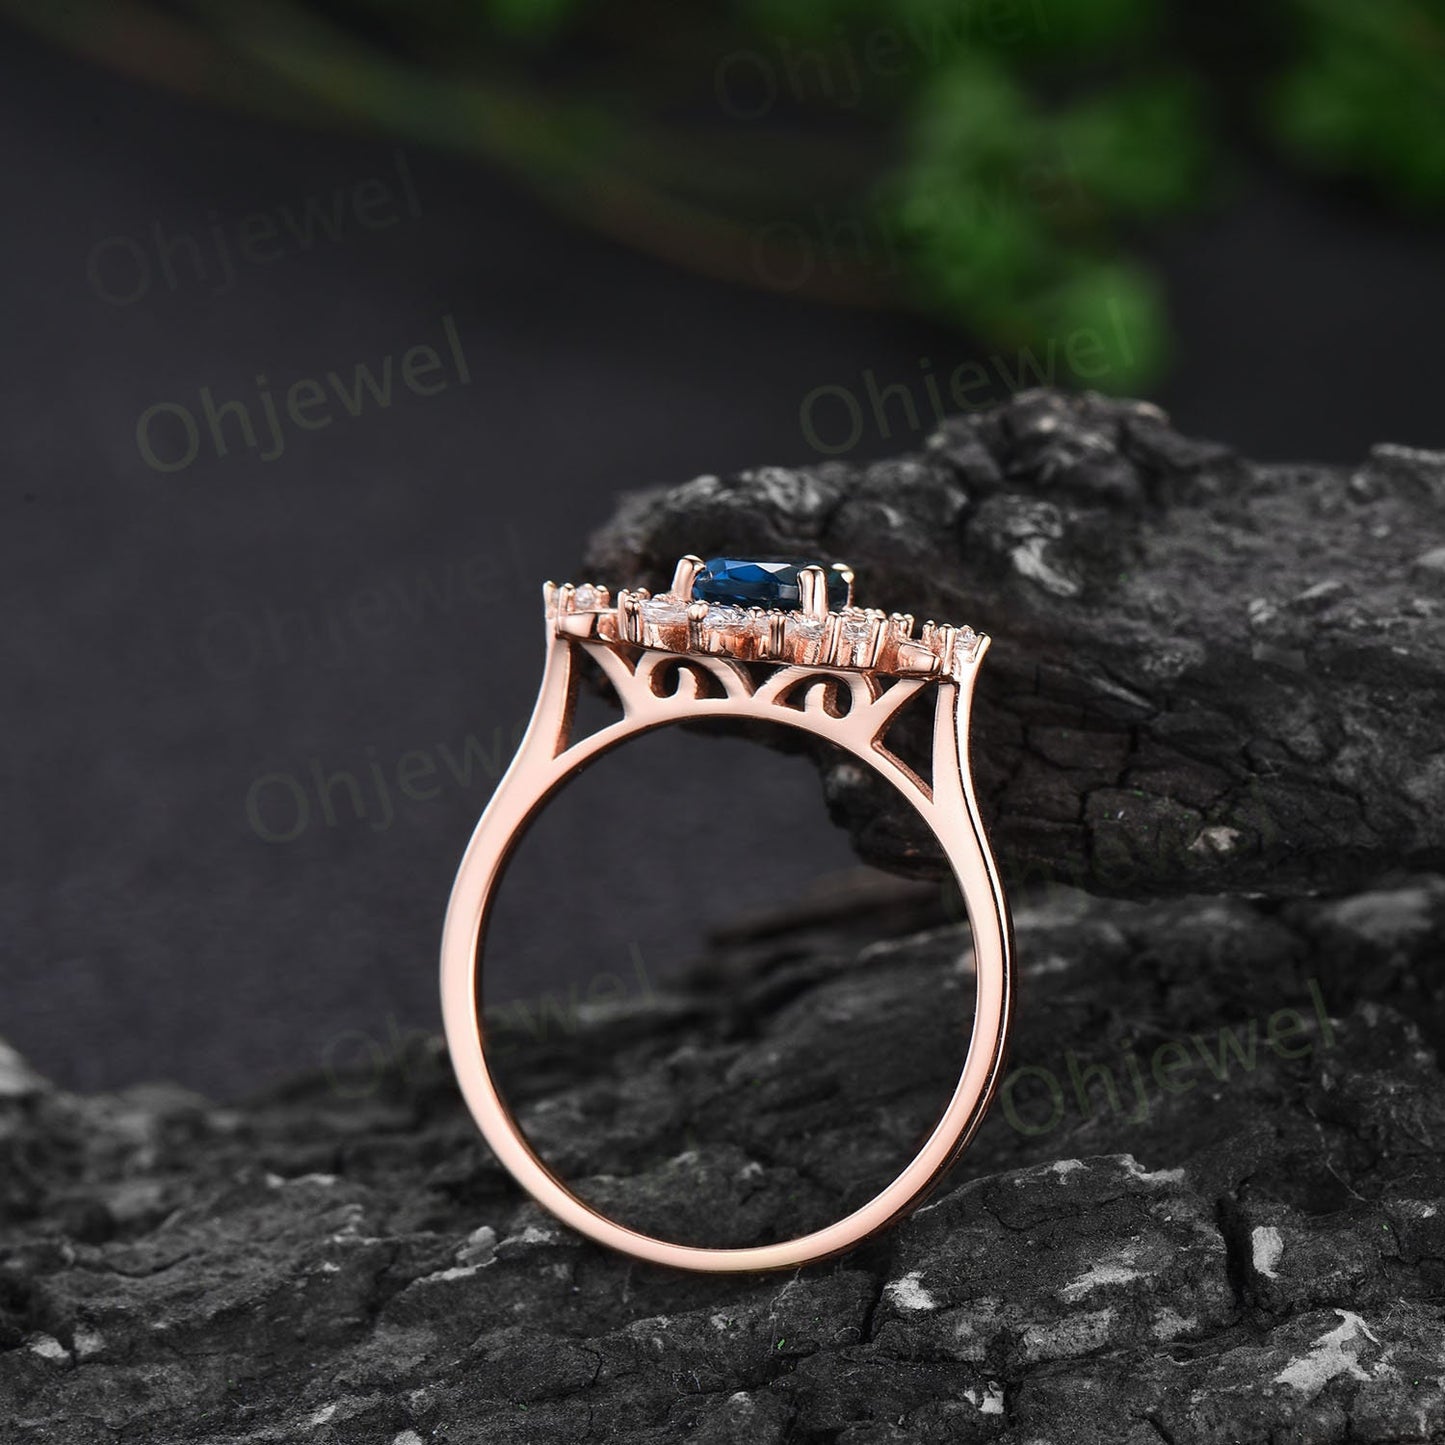 Dainty pear shaped London blue topaz ring unique engagement ring rose gold vintage style ring halo moissanite anniversary ring women gift